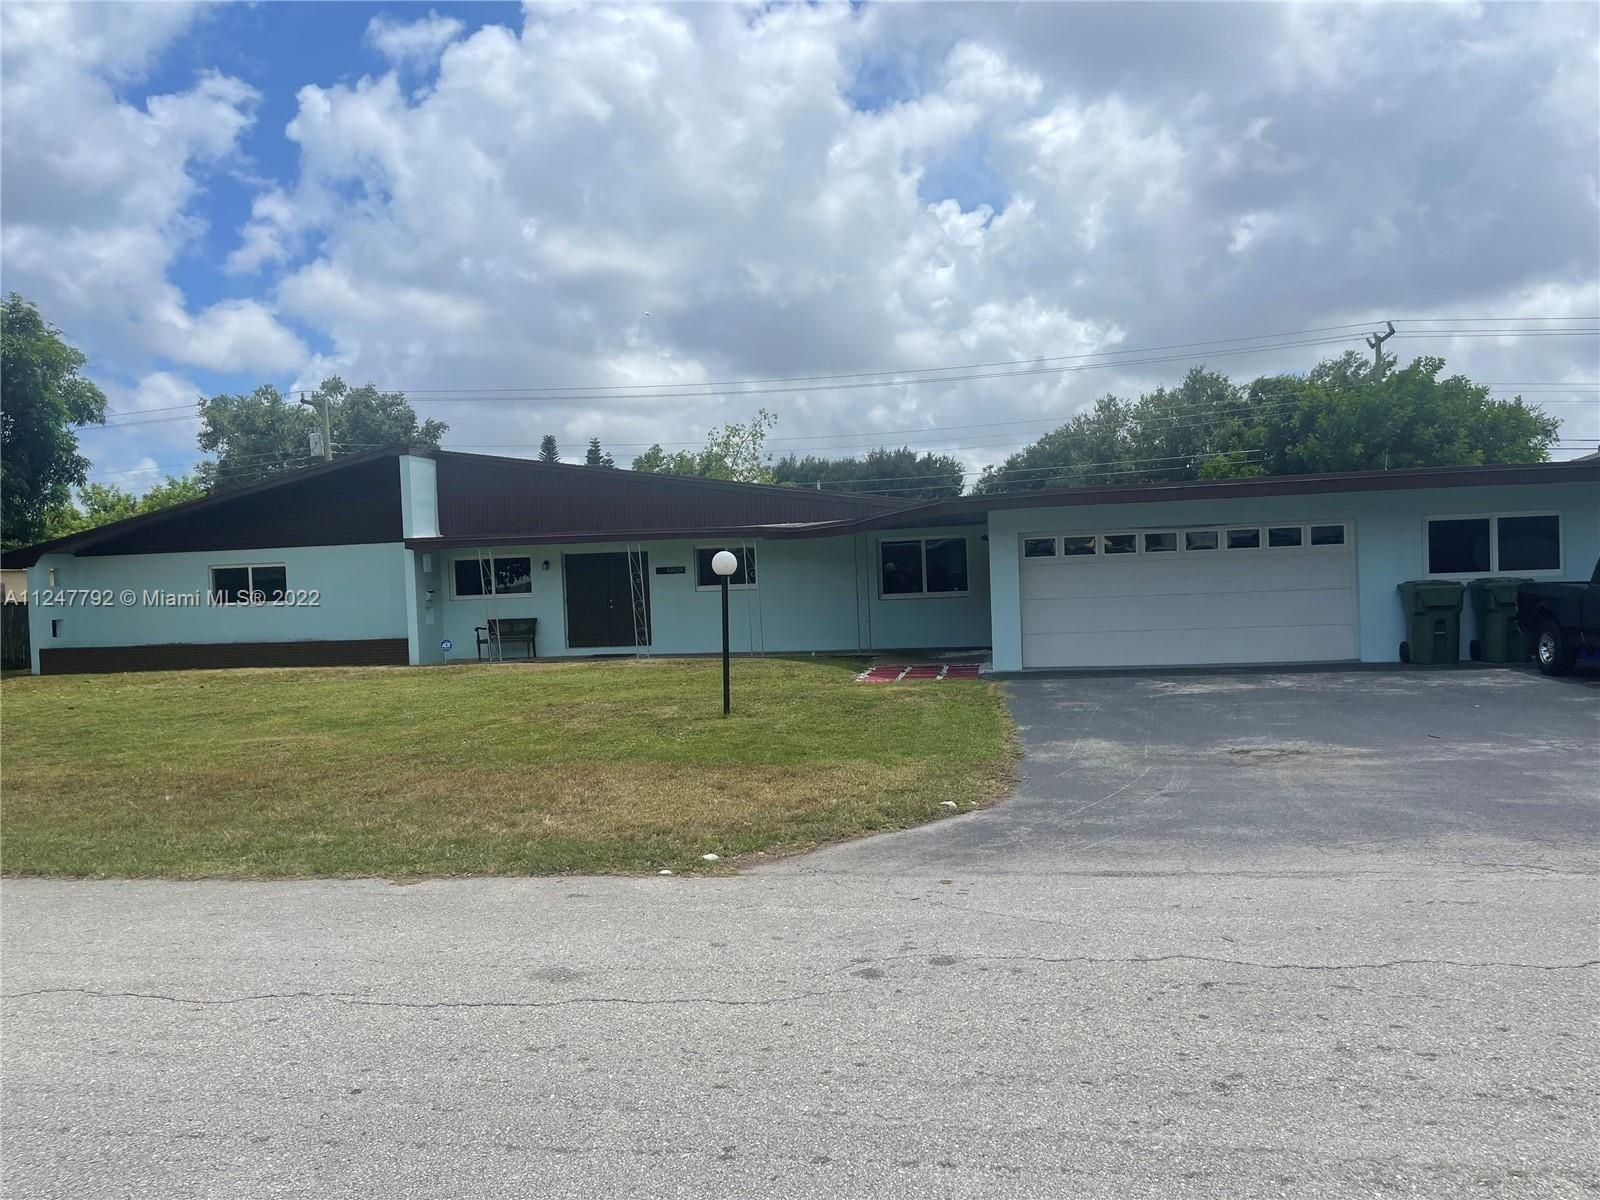 Real estate property located at 6828 14th St, Broward County, Pembroke Pines, FL